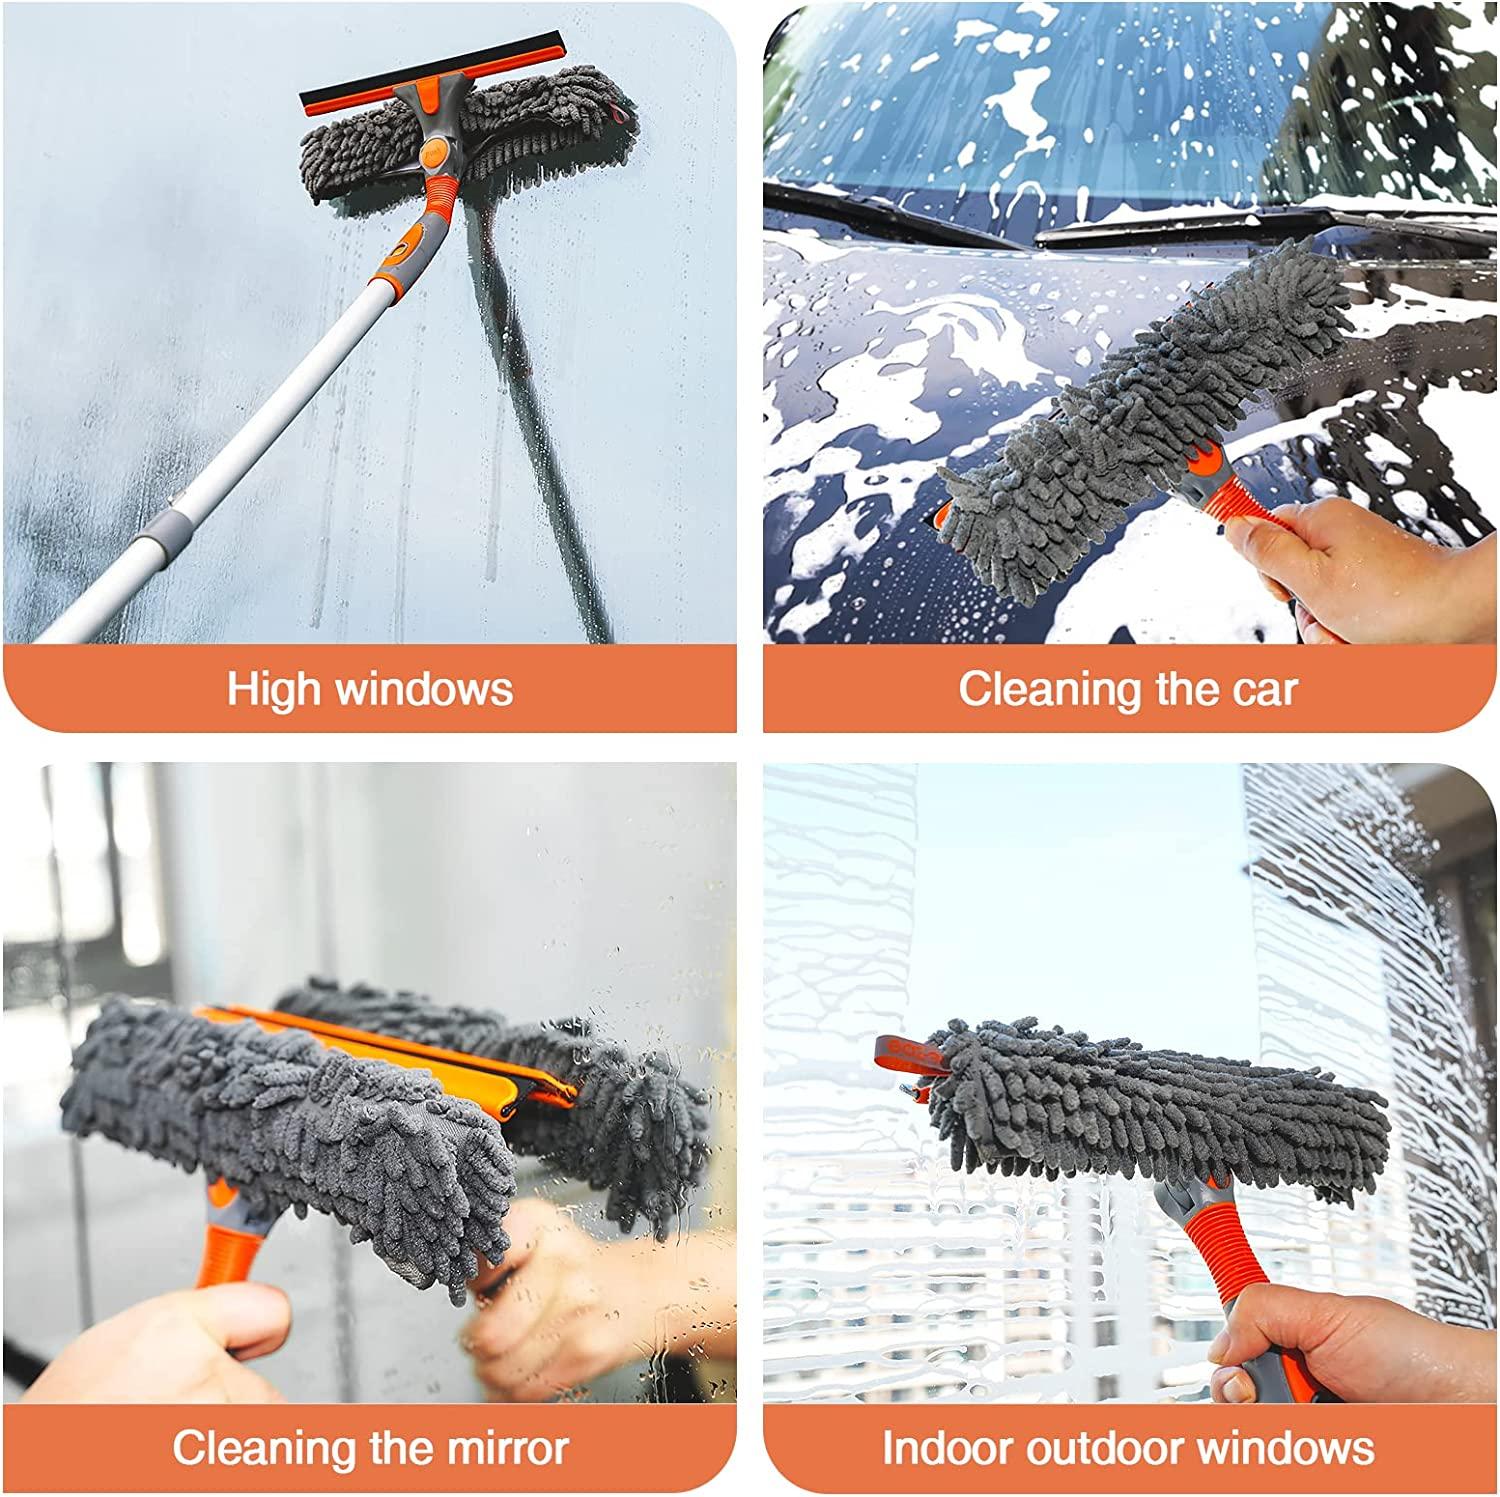  eazer Window Squeegee and Scrubber Combo Tool Attachment Kit, Window  Washing Equipment Include 2 Squeegees Blades and 2 Pads for Windows Cleaning,  Glass Cleaning - Pole Not Included. : Health & Household